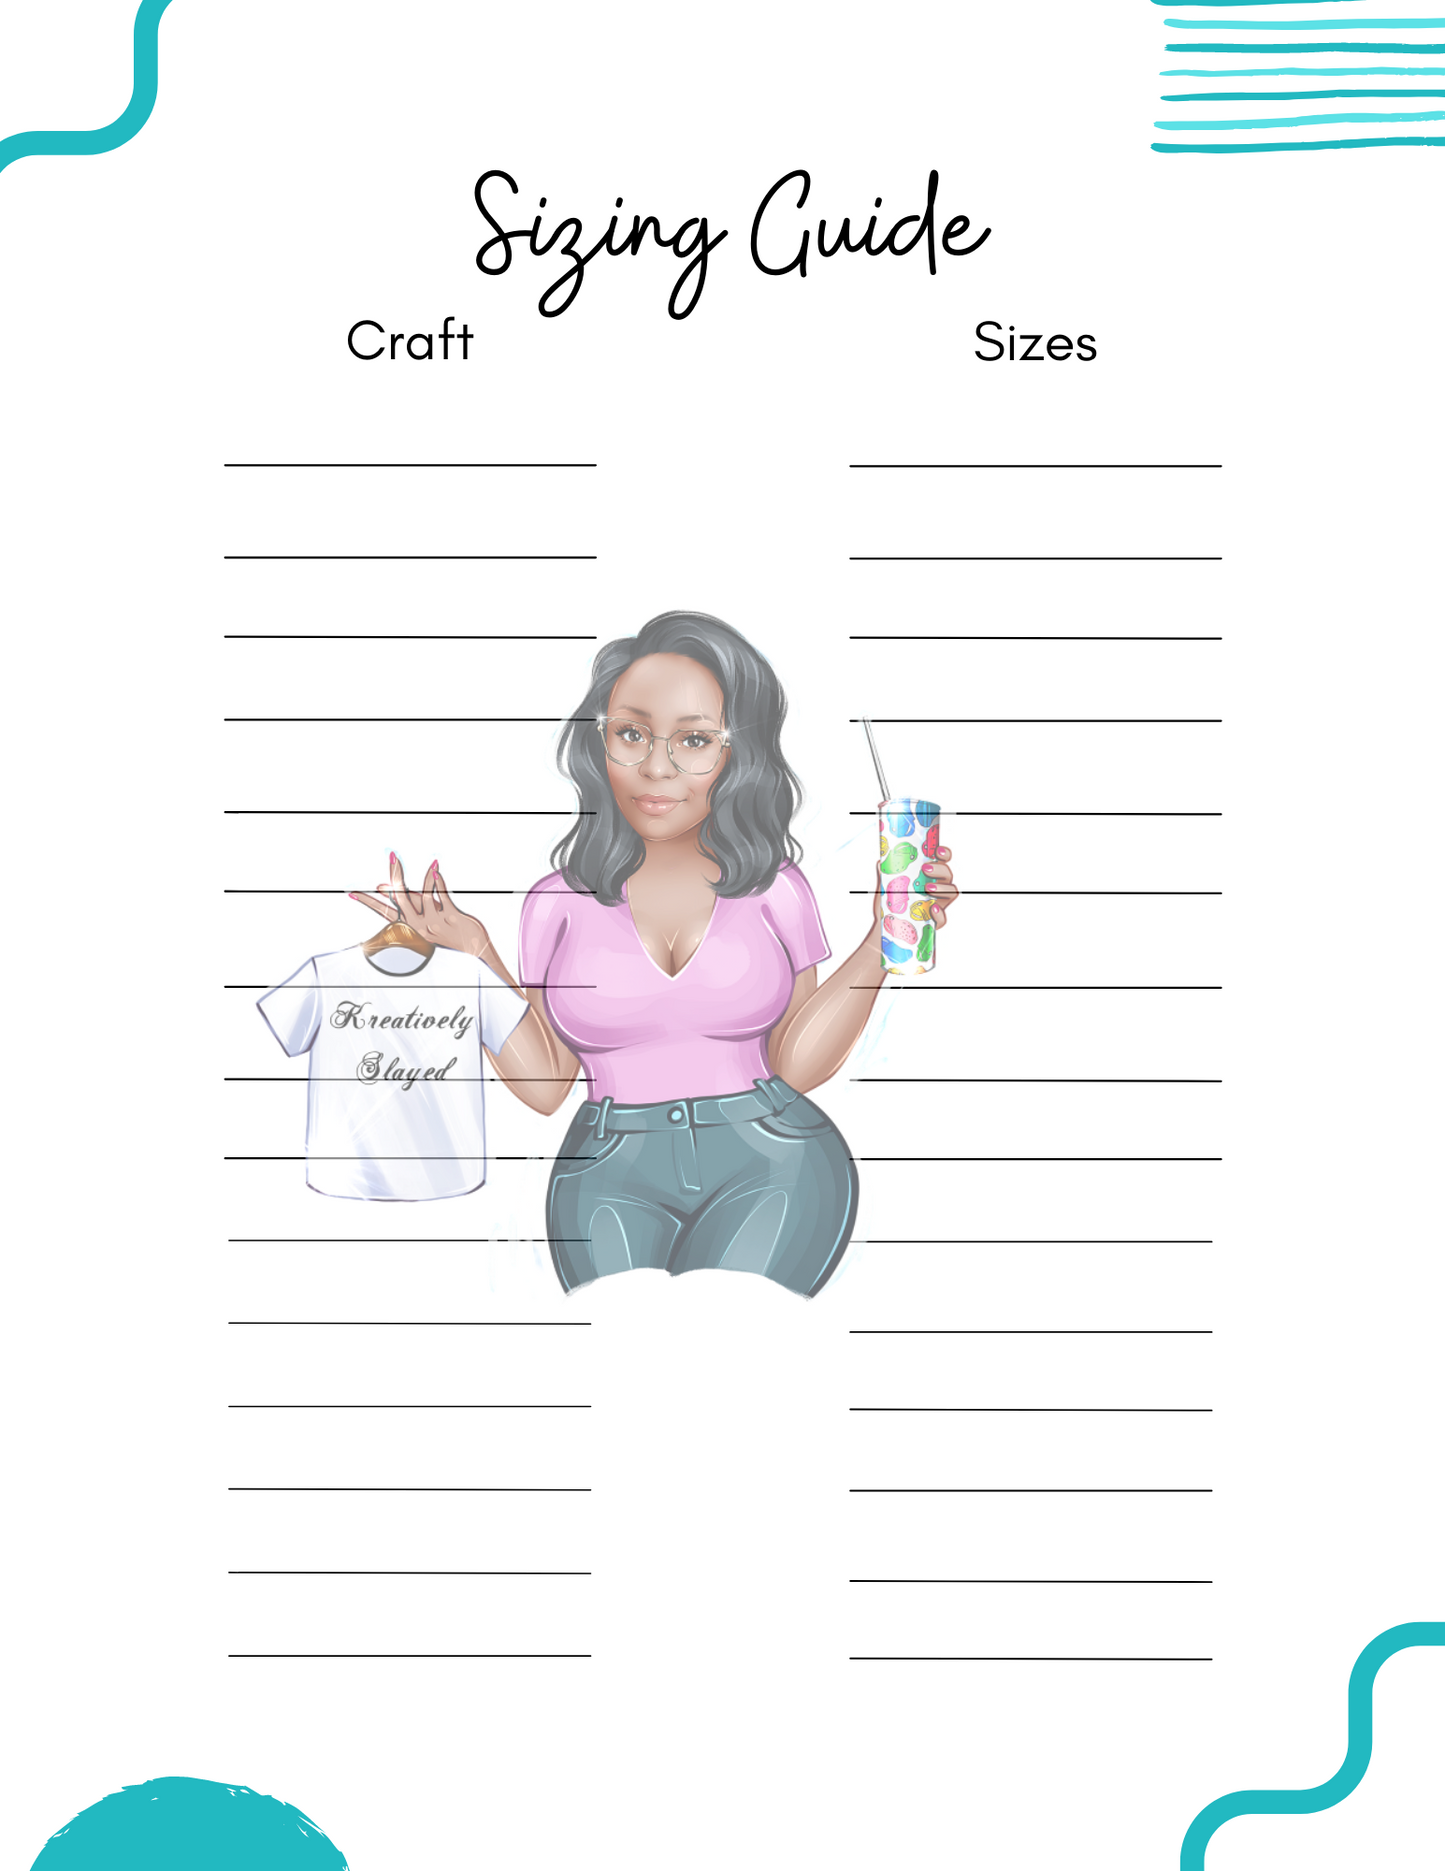 Crafting Journal: Project Planning Notebook For Small business Crafters, Record Book For Design Ideas, Content ideas, Simple Bookkeeping (Digital)